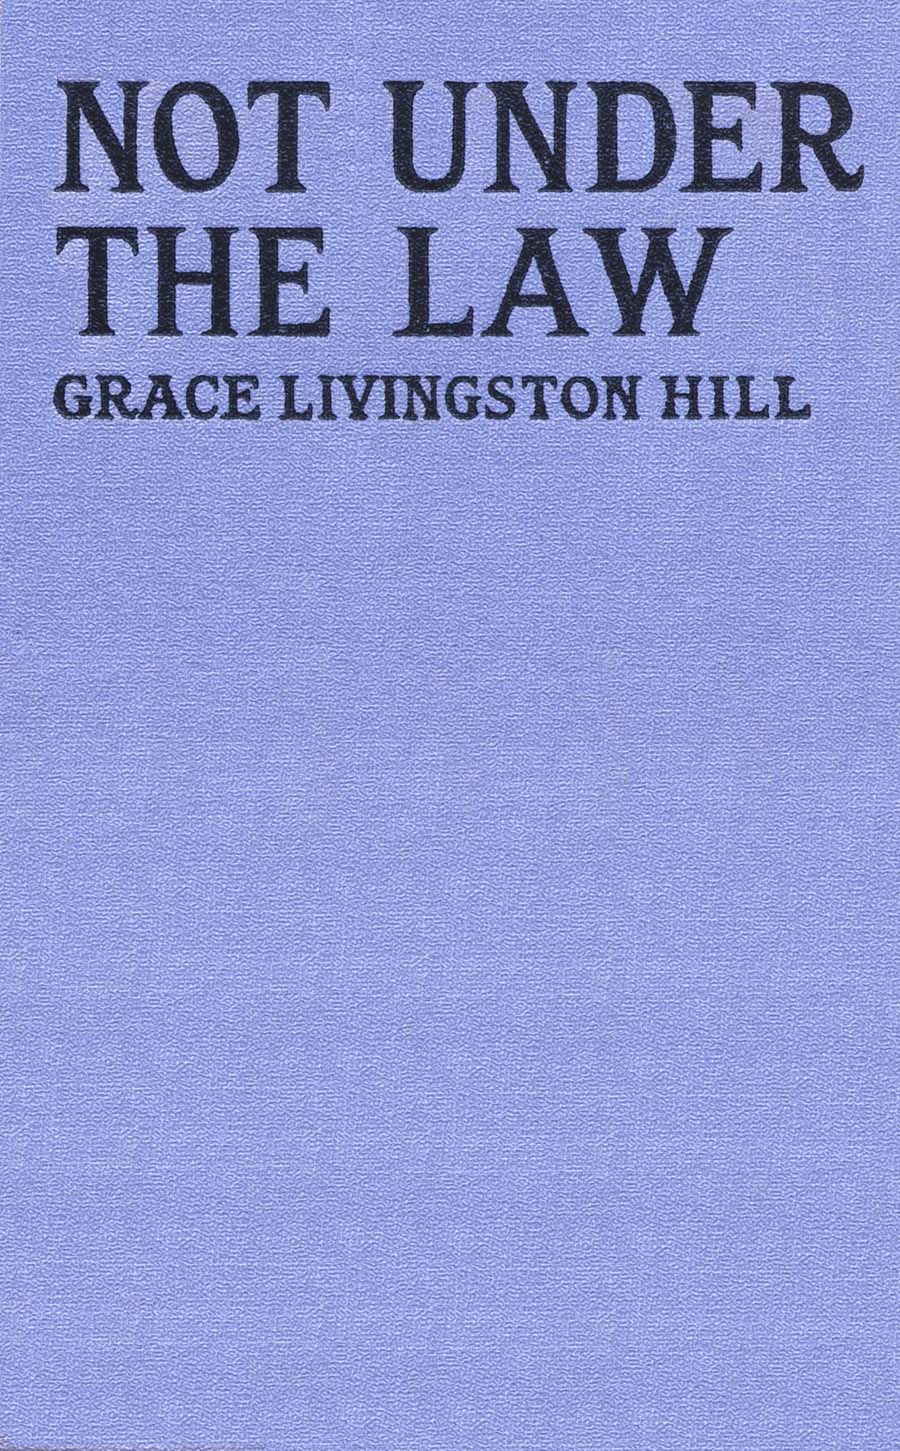 Not Under the Law, by Grace Livingston Hill—A Project Gutenberg eBook